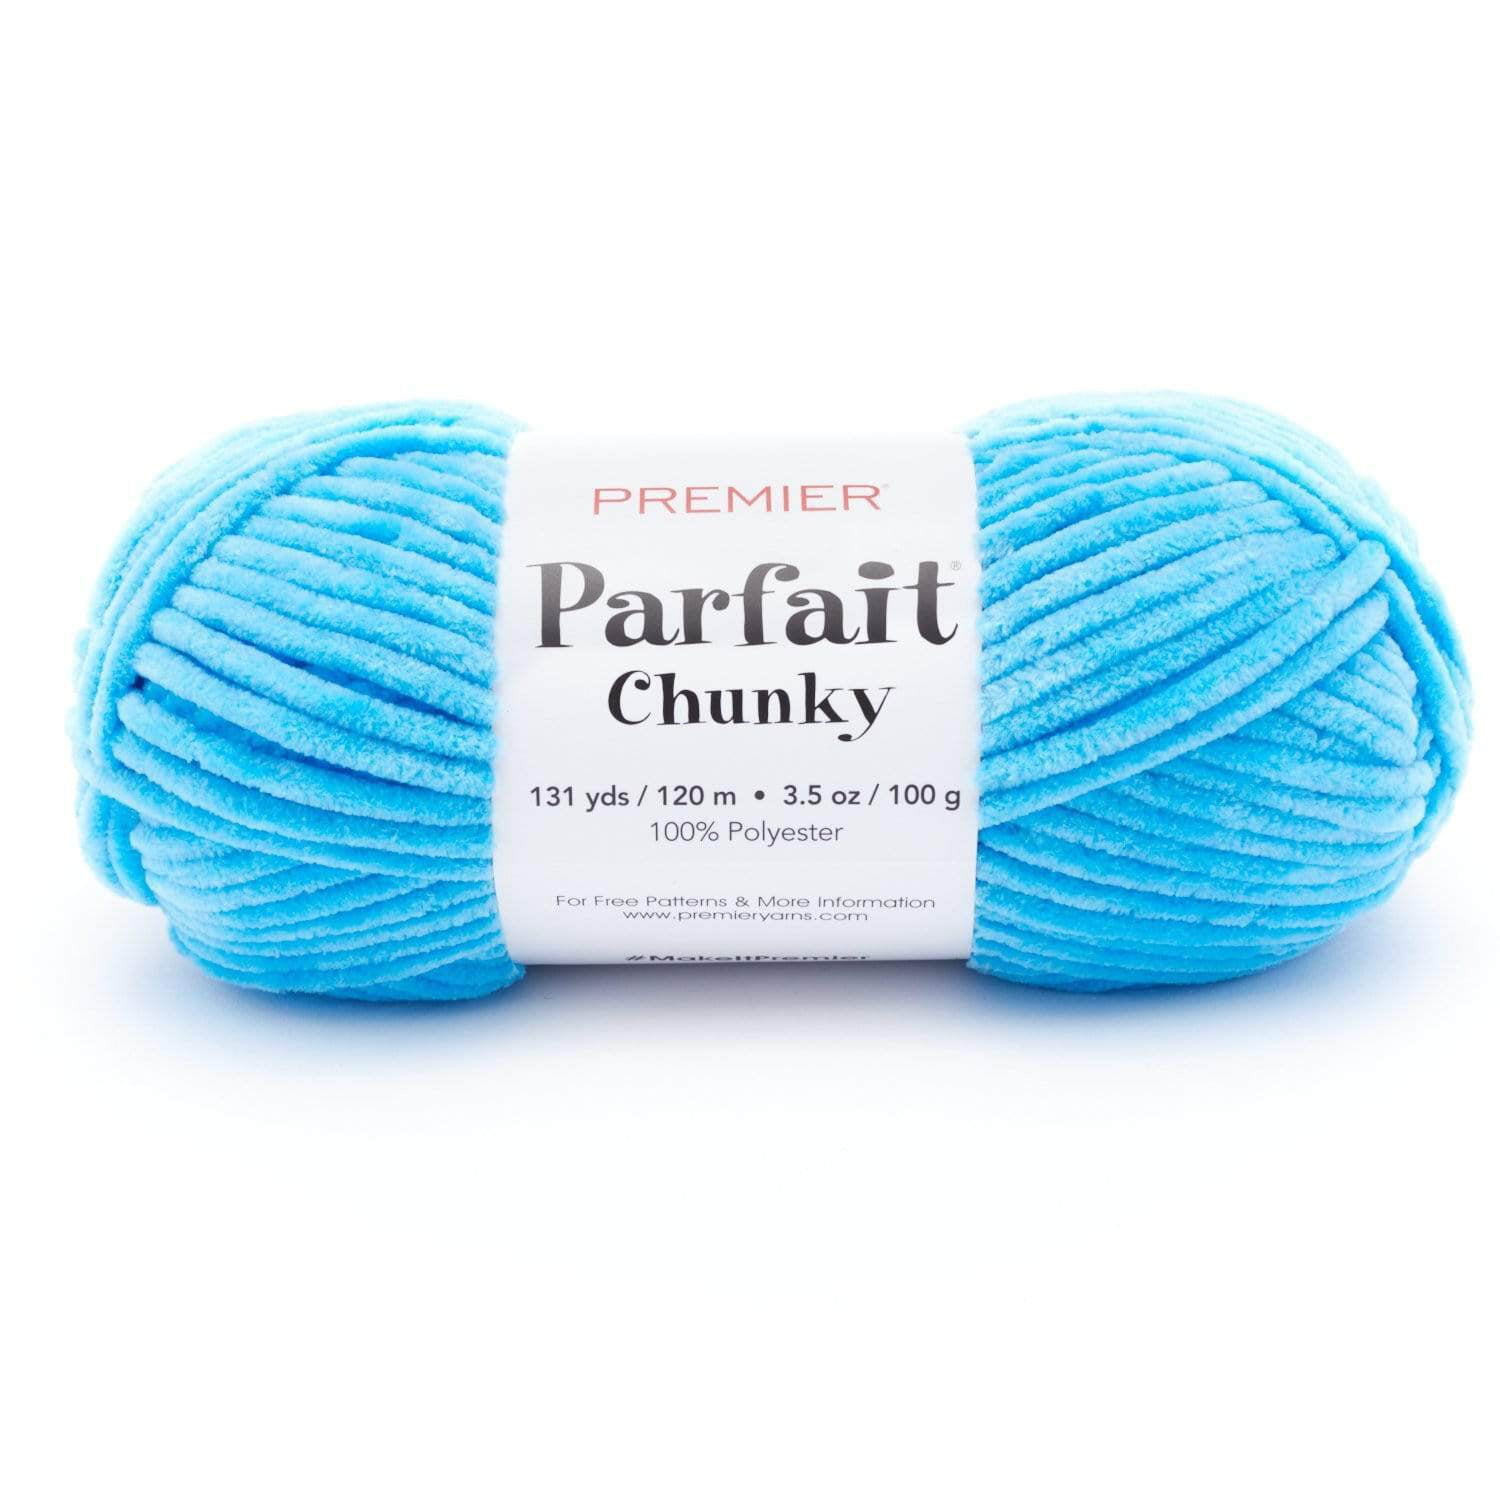 Premier Yarns Parfait Chunky - 3.5 Oz - #6 Super Bulky Weight - 3 Pack  Bundle with 10 Bella's Crafts Stitch Markers (Cornflower)